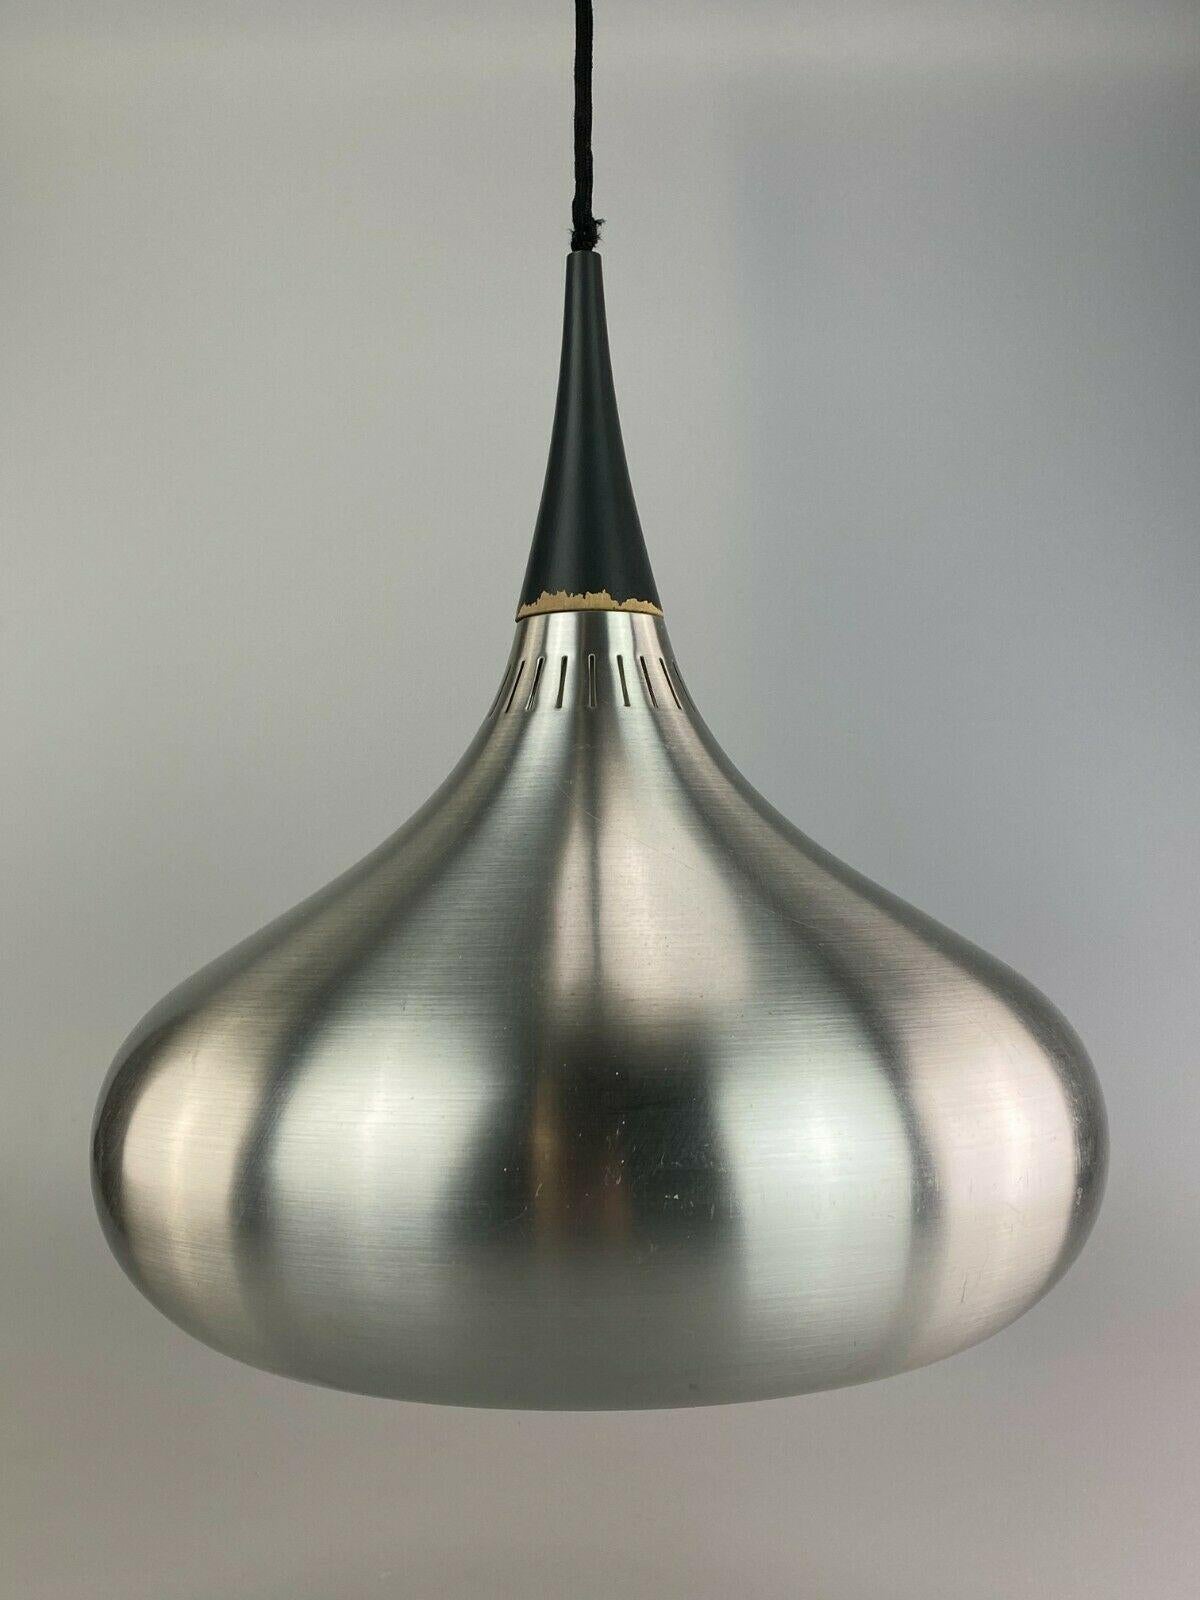 60s 70s lamp light ceiling lamp sheet metal Space Age Danish Denmark design

Object: ceiling lamp

Manufacturer: Fog & Morup

Condition: good - vintage

Age: around 1960-1970

Dimensions:

Diameter = 33cm
Height = 36cm

Other